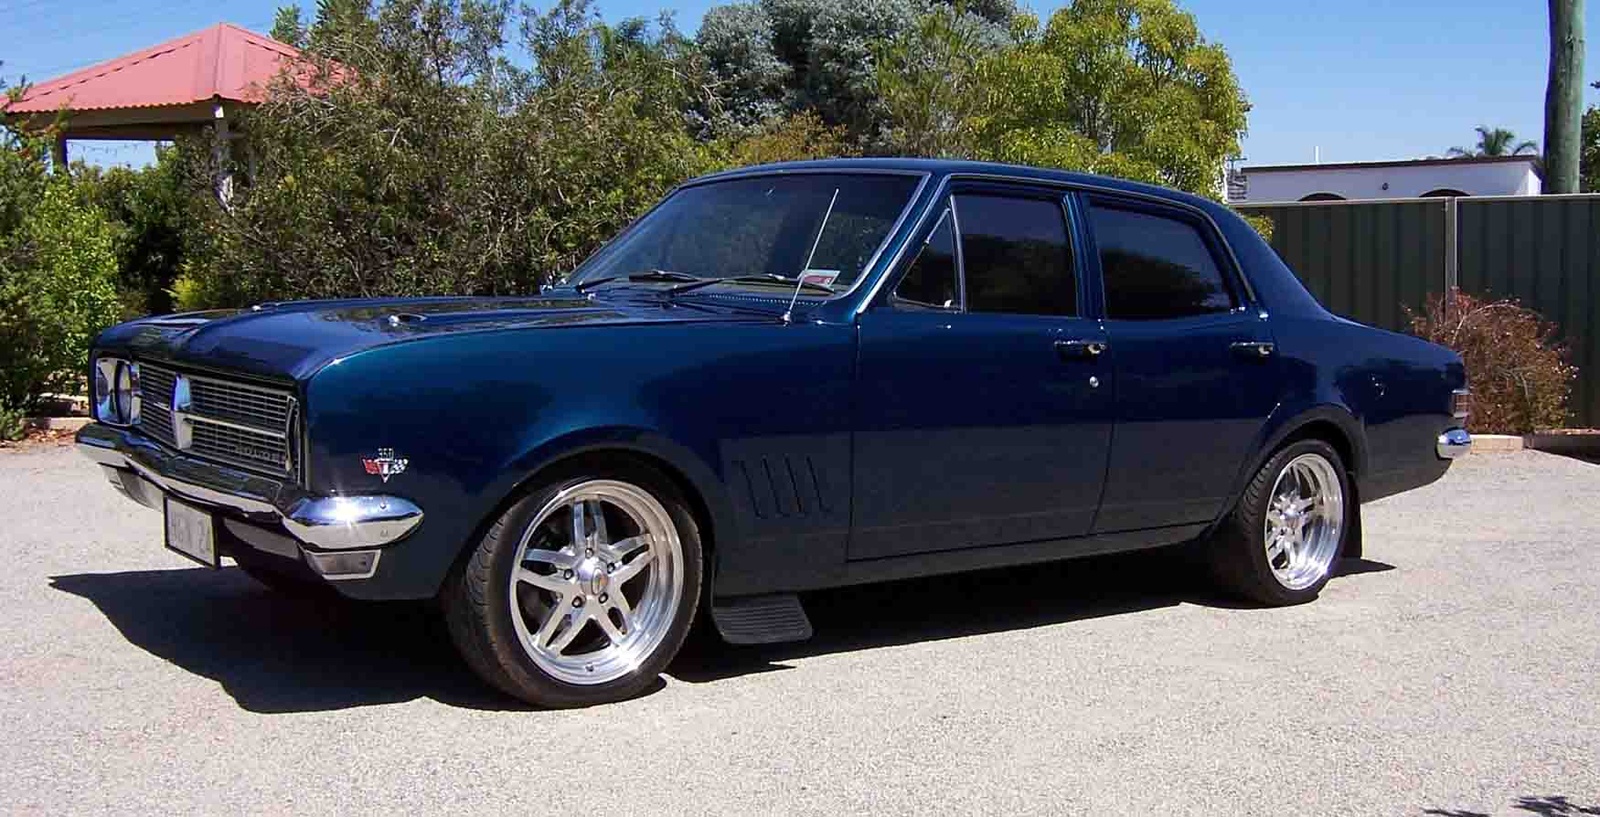 Holden Kingswood - cars catalog, specs, features, photos, videos, review,